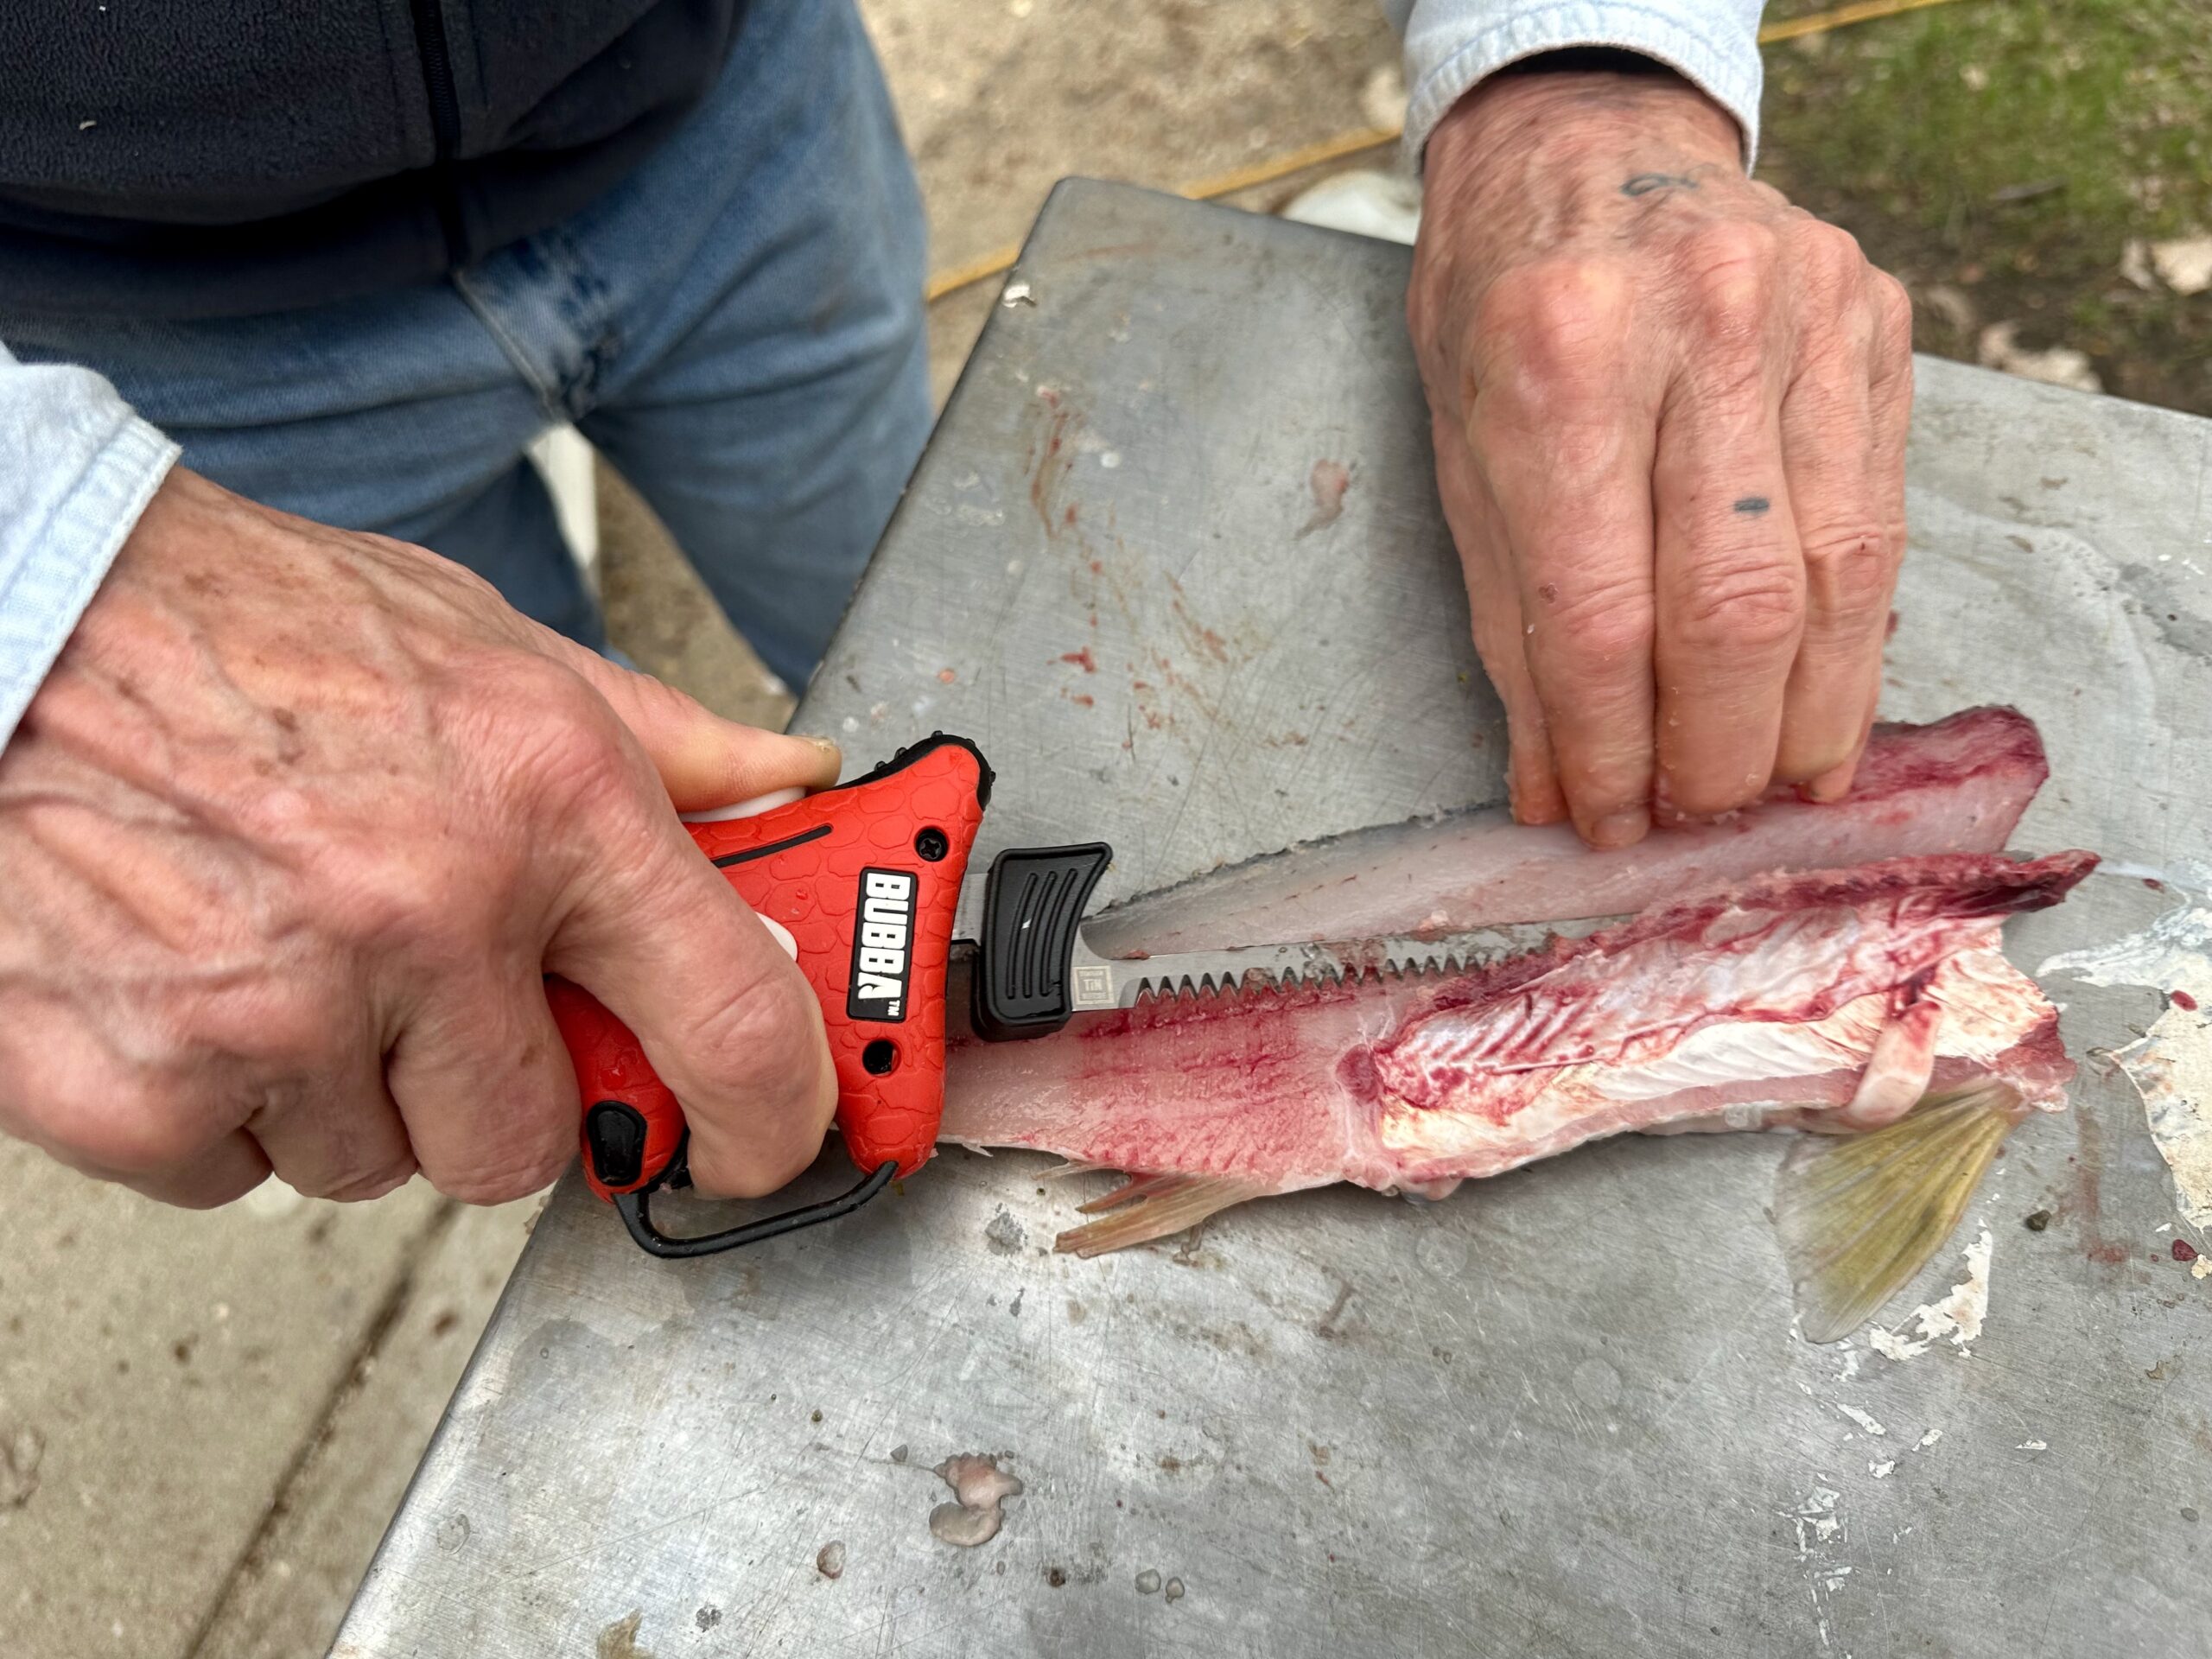 Filleting Fish with a Fixed-Blade Knife vs. an Electric Knife